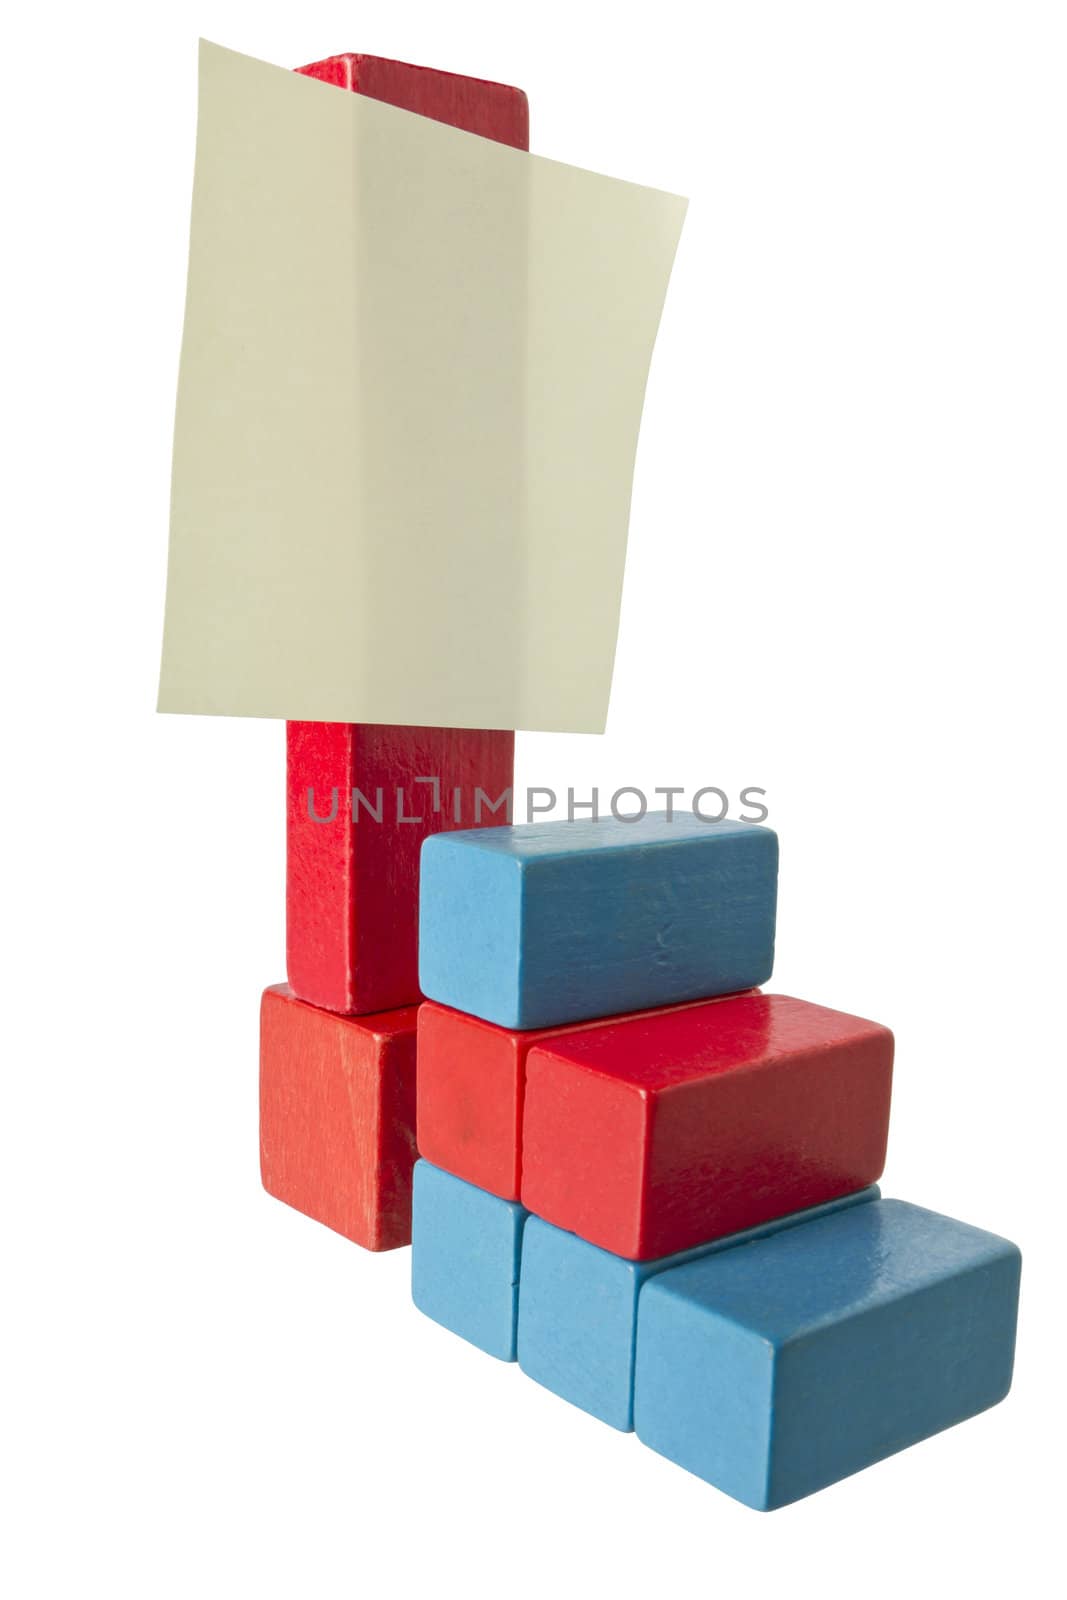 stair made of toy blocks by gewoldi